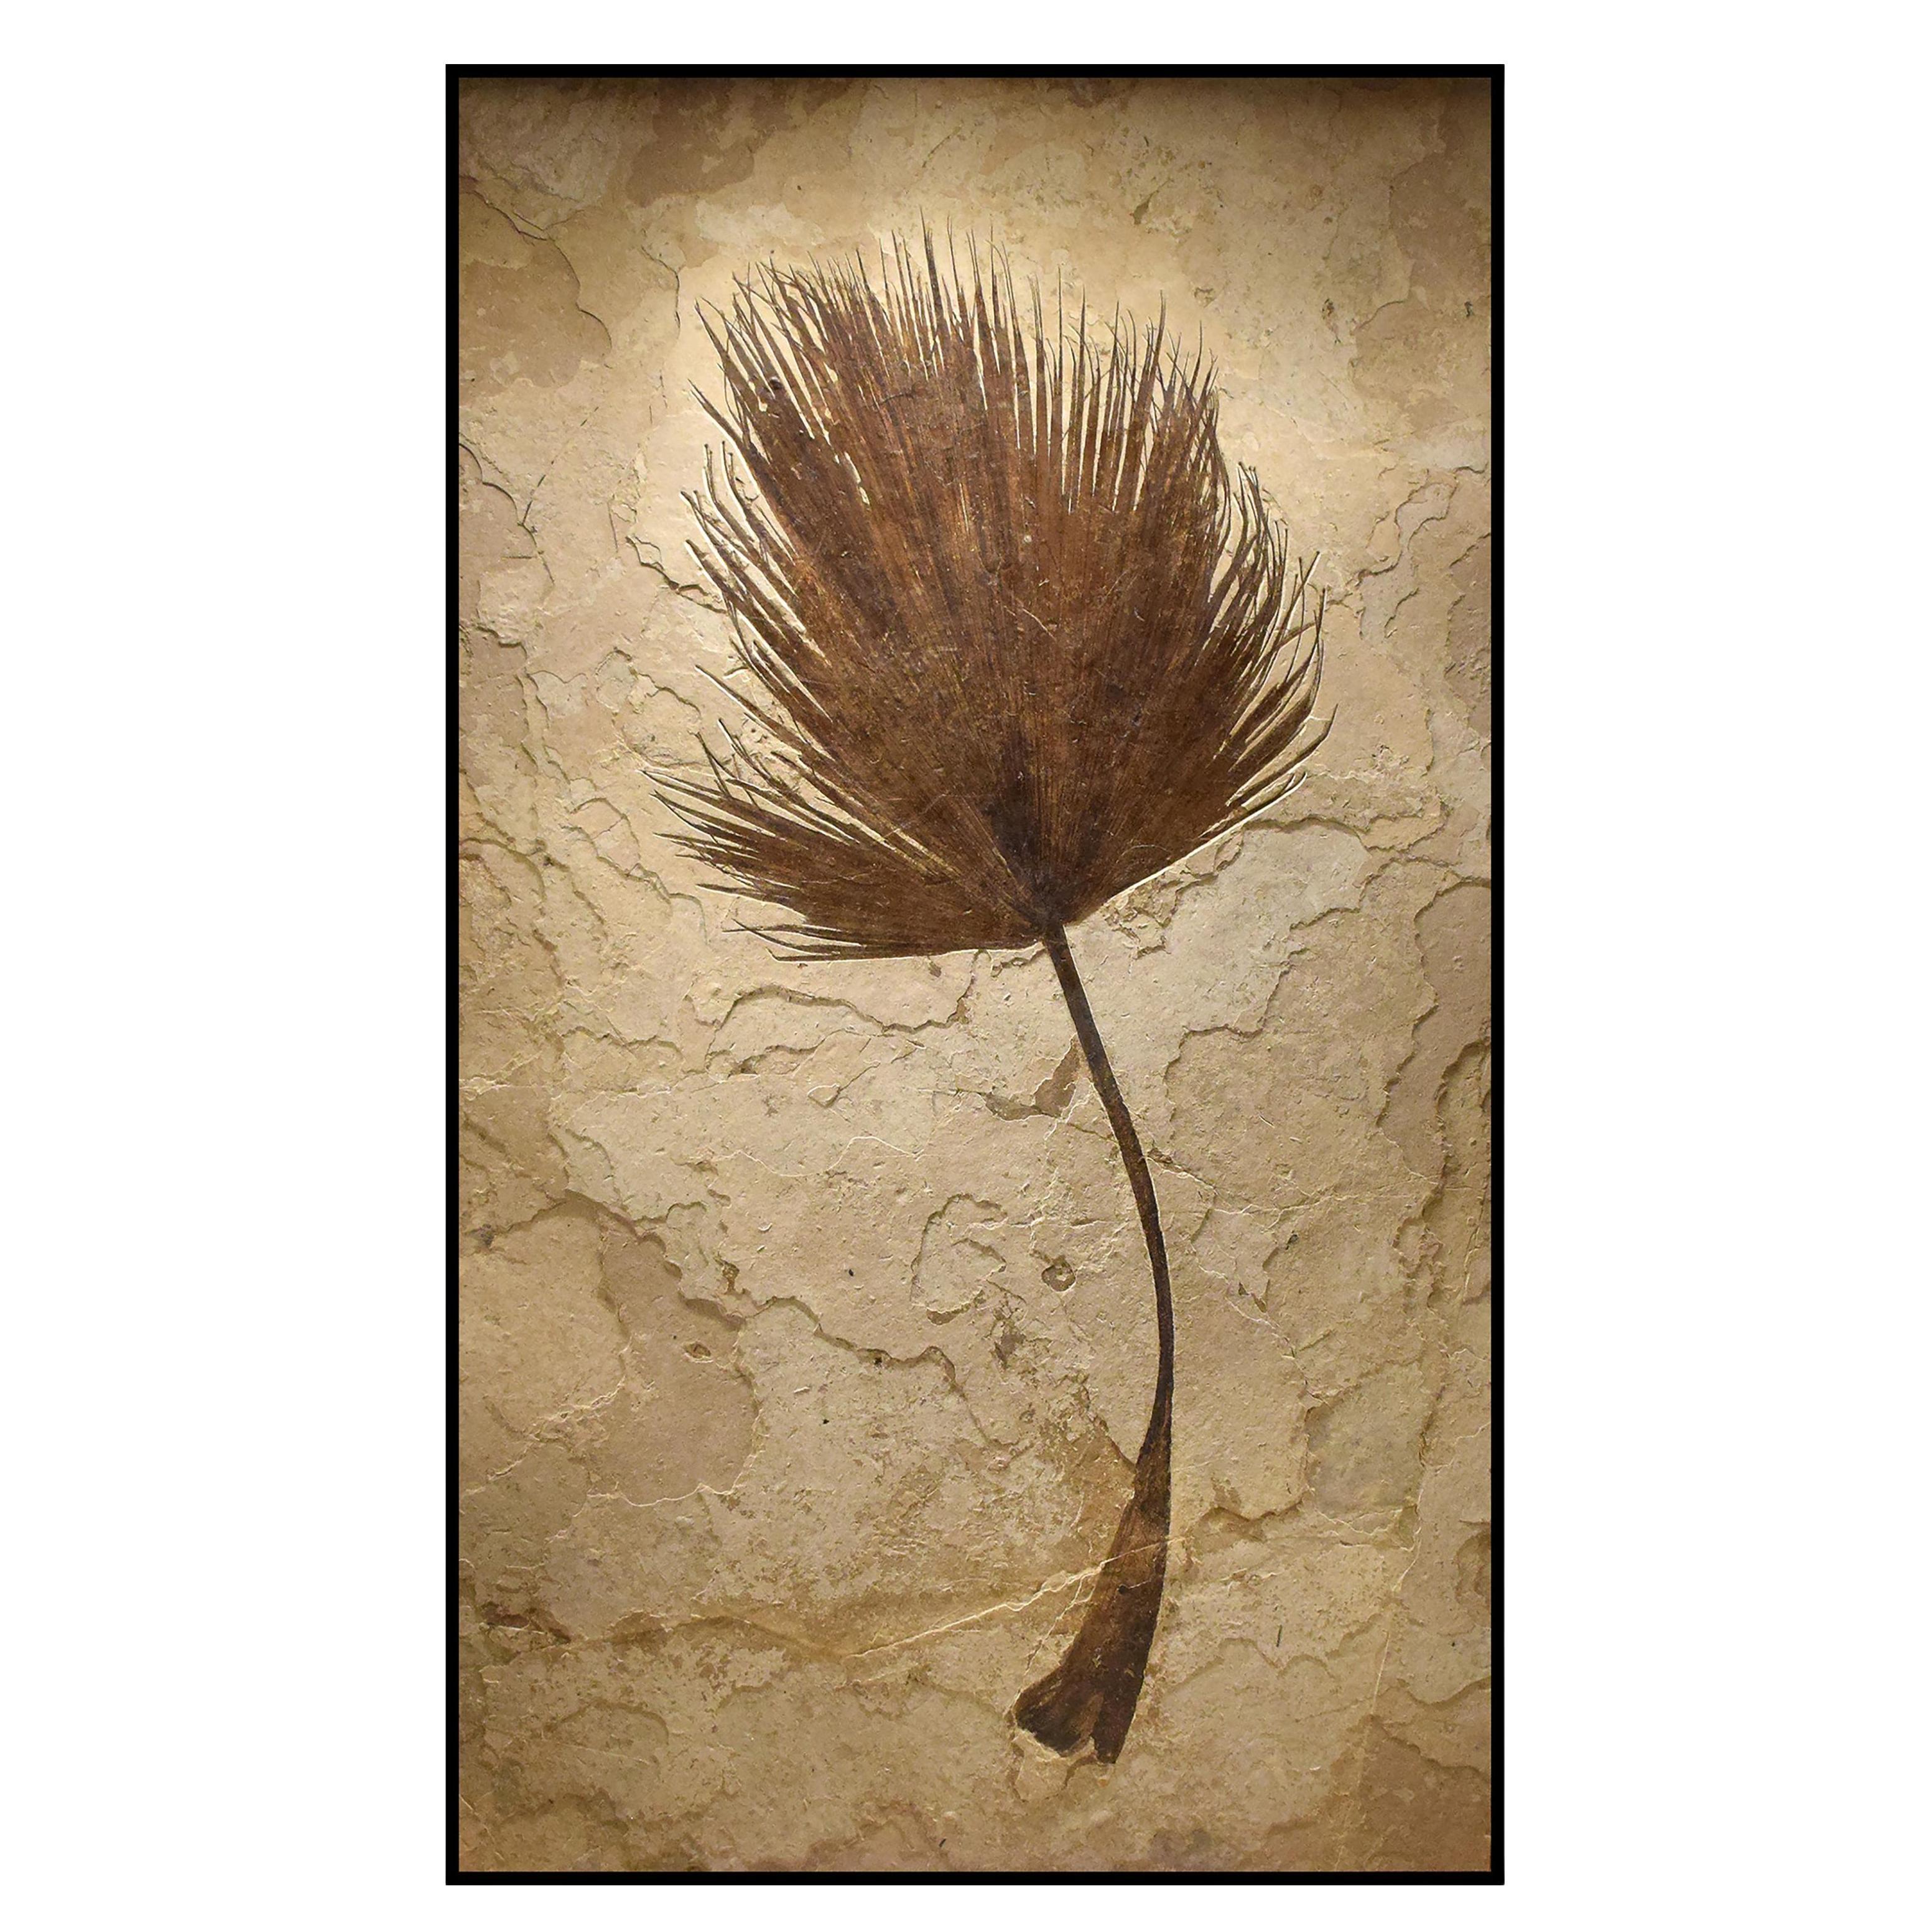 50 Million Year Old Eocene Era Fossil Palm Frond Mural in Stone, from Wyoming